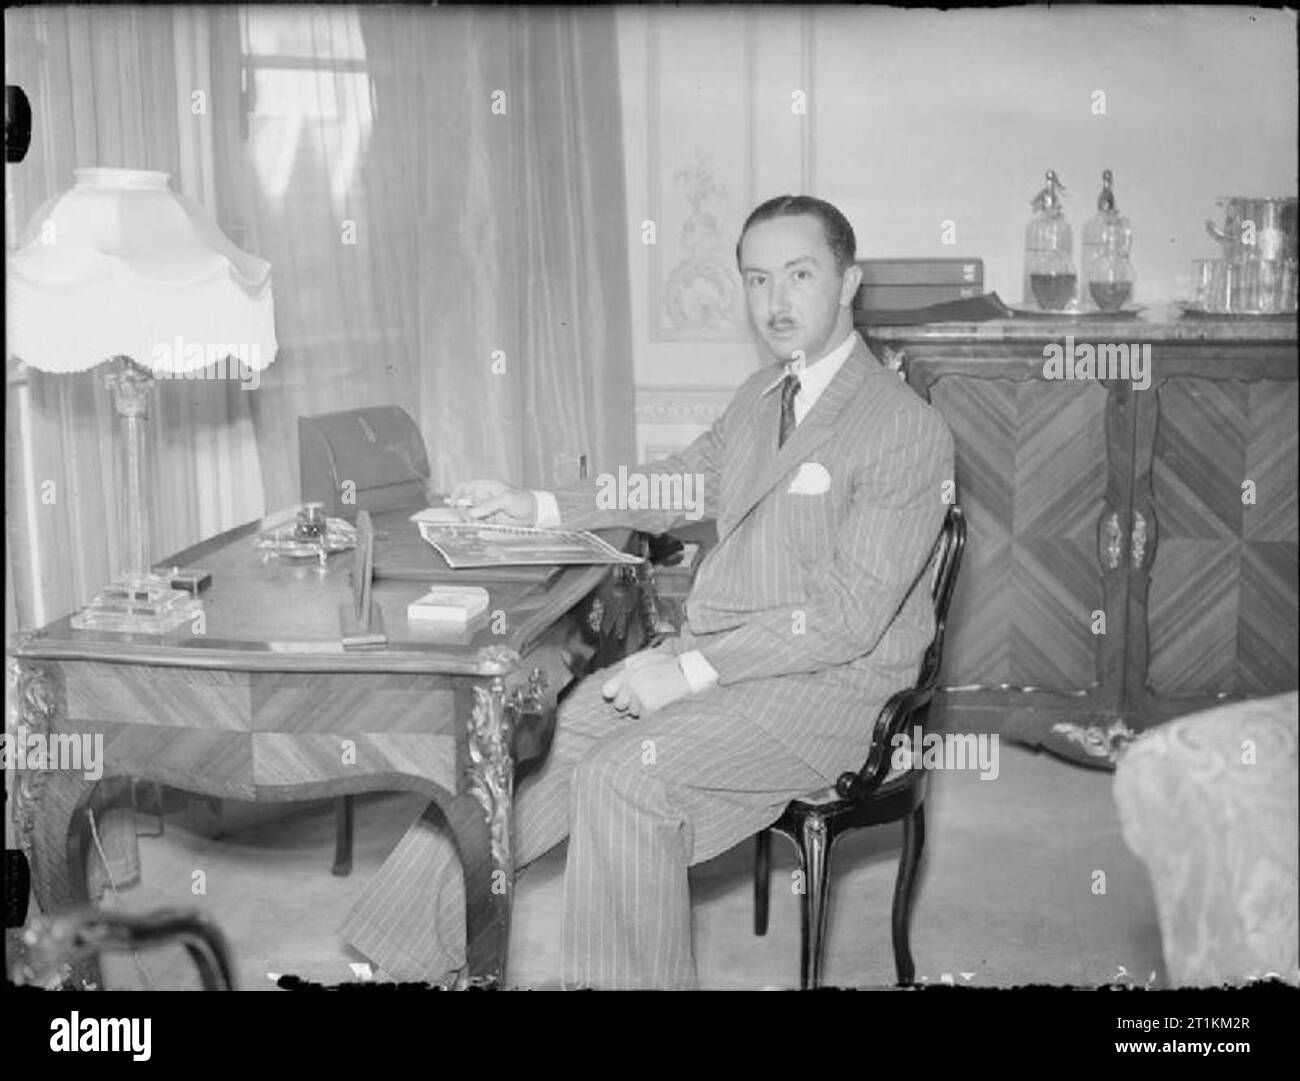 His Royal Highness the Emir Abdul Illah, Regent of Iraq, London, England, UK, July 1945 A portrait of the Regent of Iraq sitting at his desk in his room at Claridge's Hotel in London. According to the original caption, the Regent spent July in England on his way back to Iraq following the San Francisco conference. He is looking at a group photograph, possibly taken at the Conference. Stock Photo